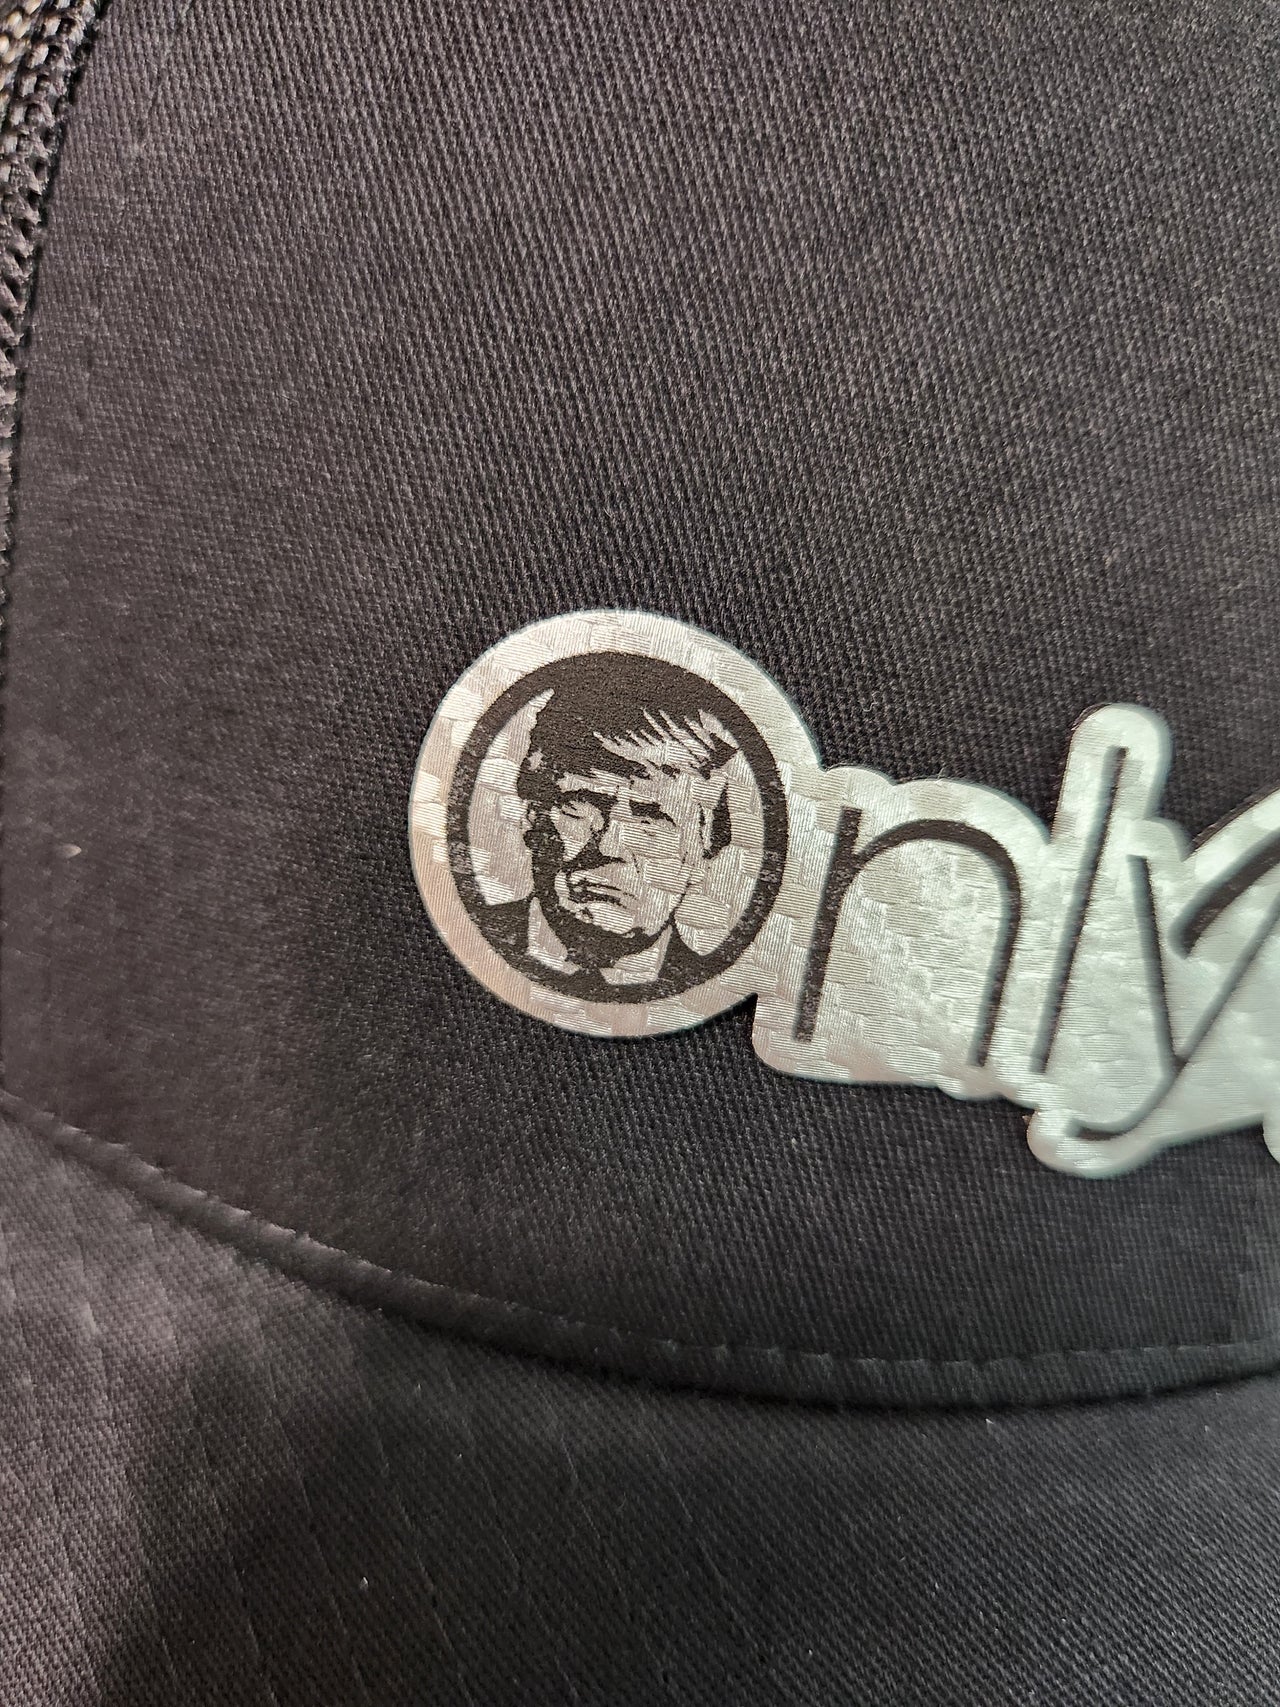 Only Felons Trump Face Trucker Hat | Political Humor Leather Patch Hat